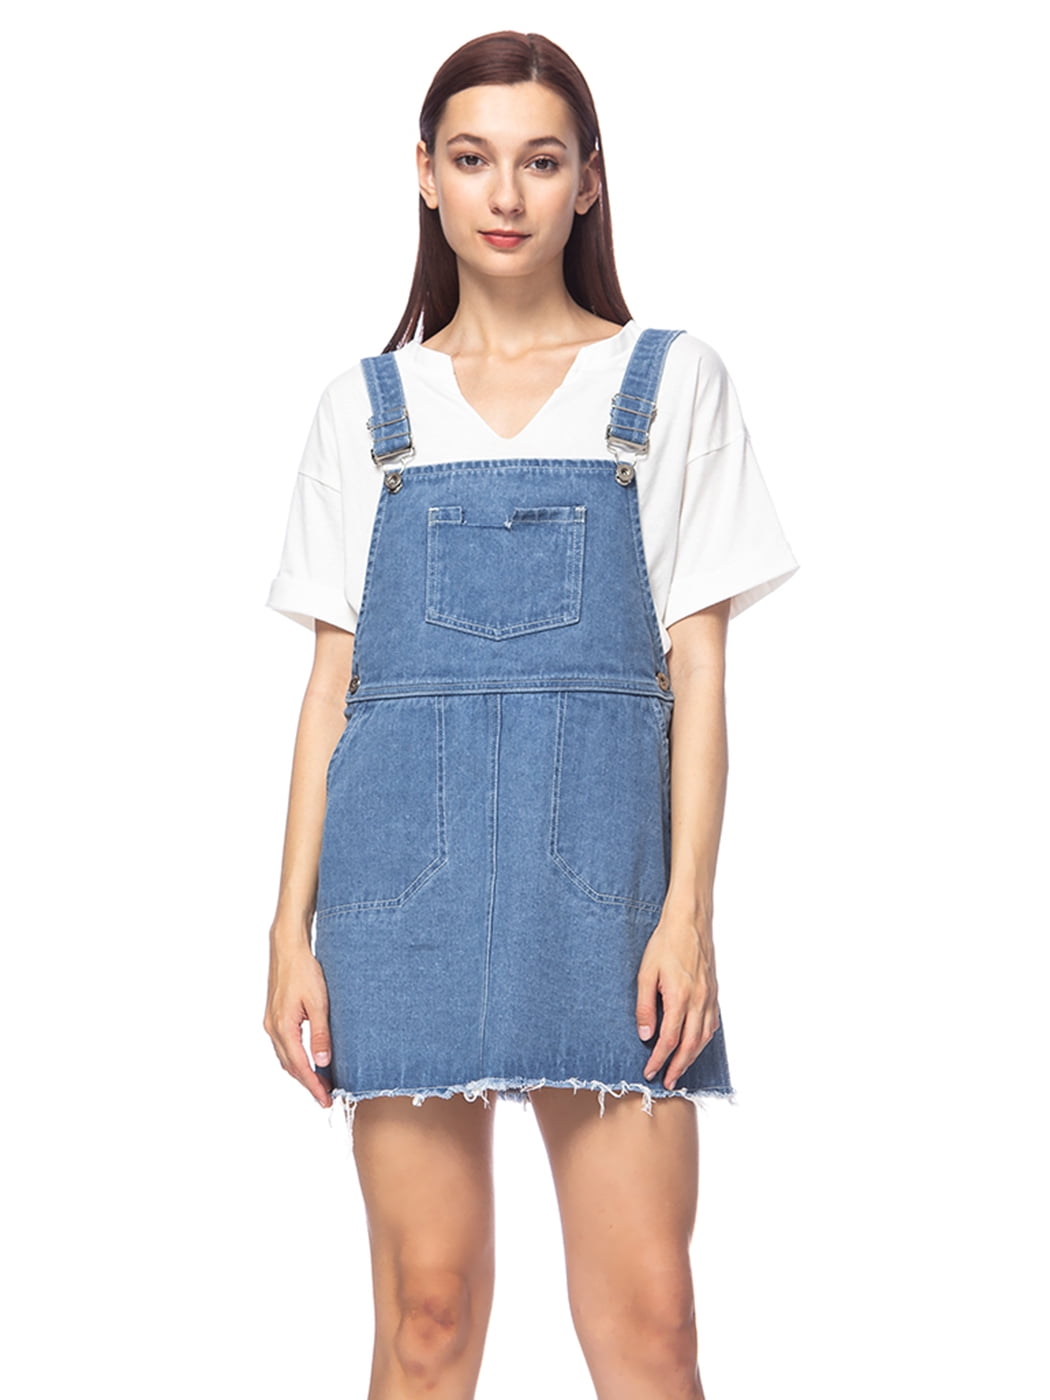 overall strap dress